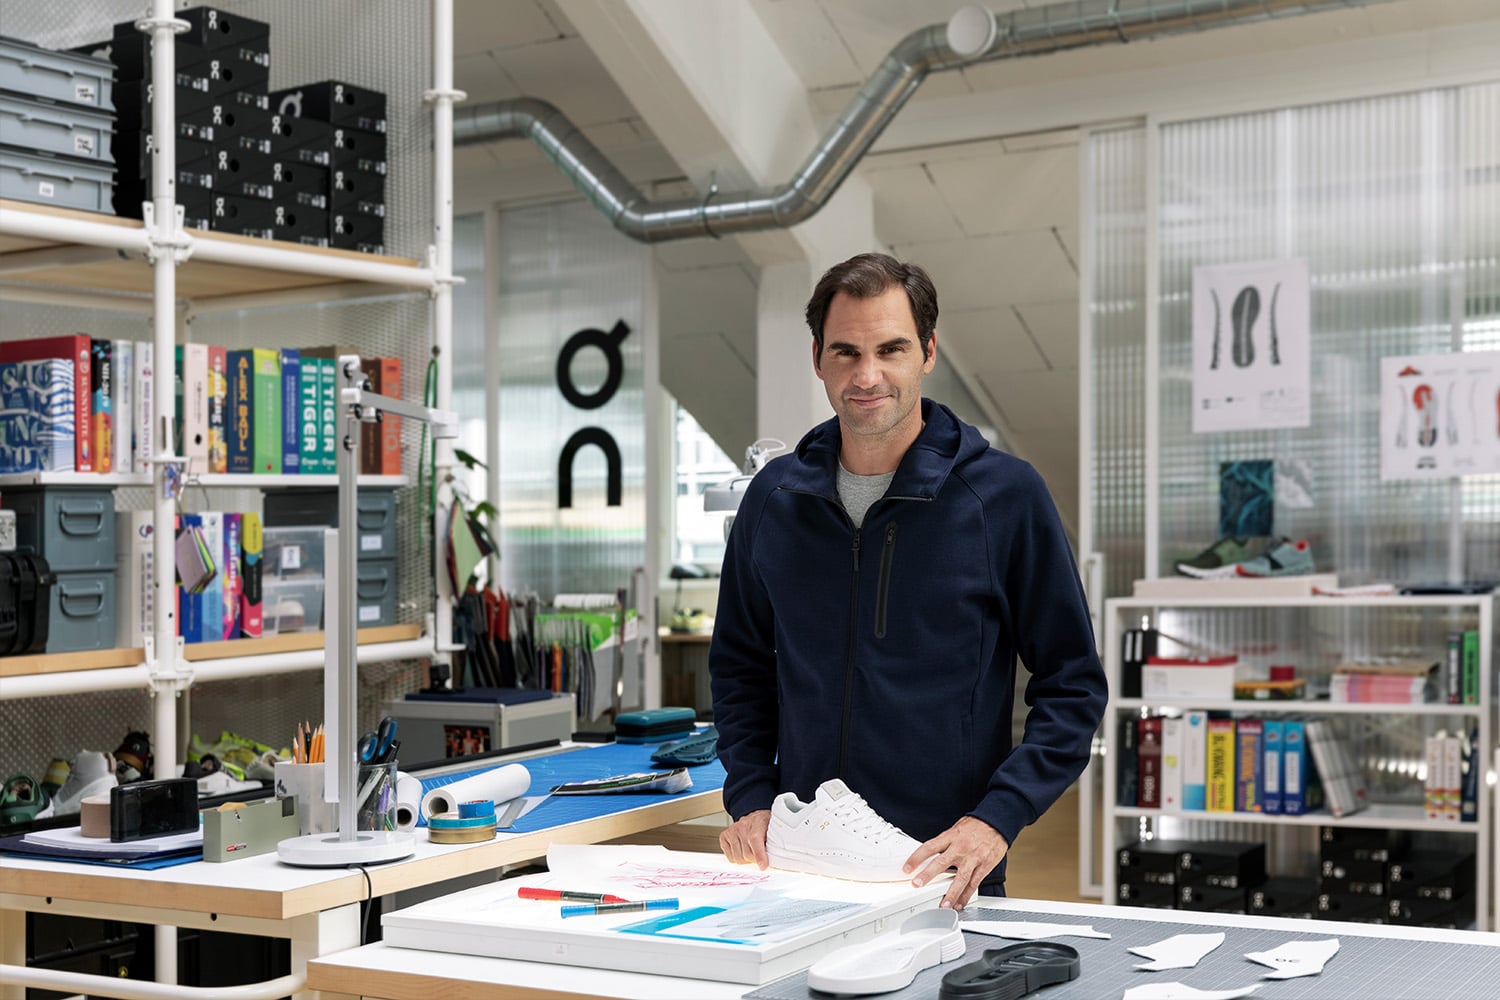 Roger Federer in the On design lab with his signature tennis shoe.